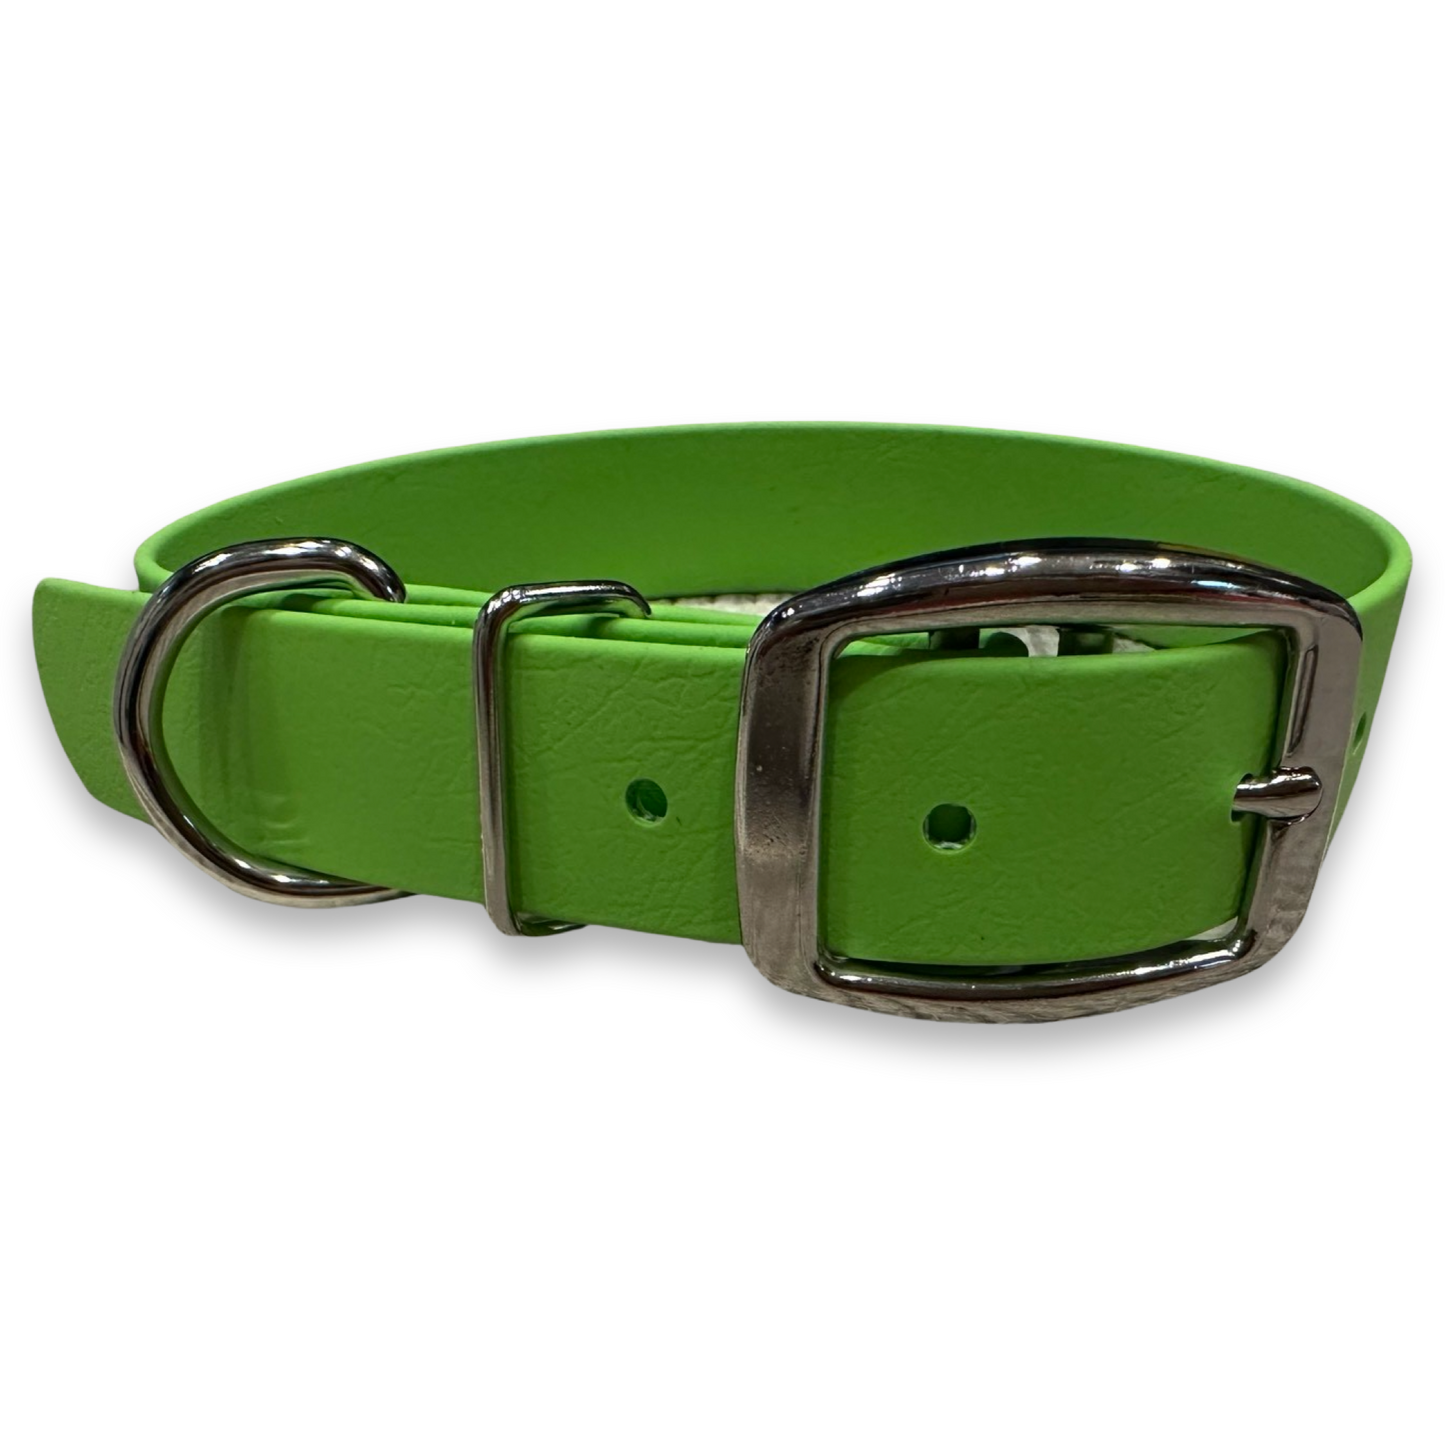 Daily Dog Collar-1” Nickel Plated